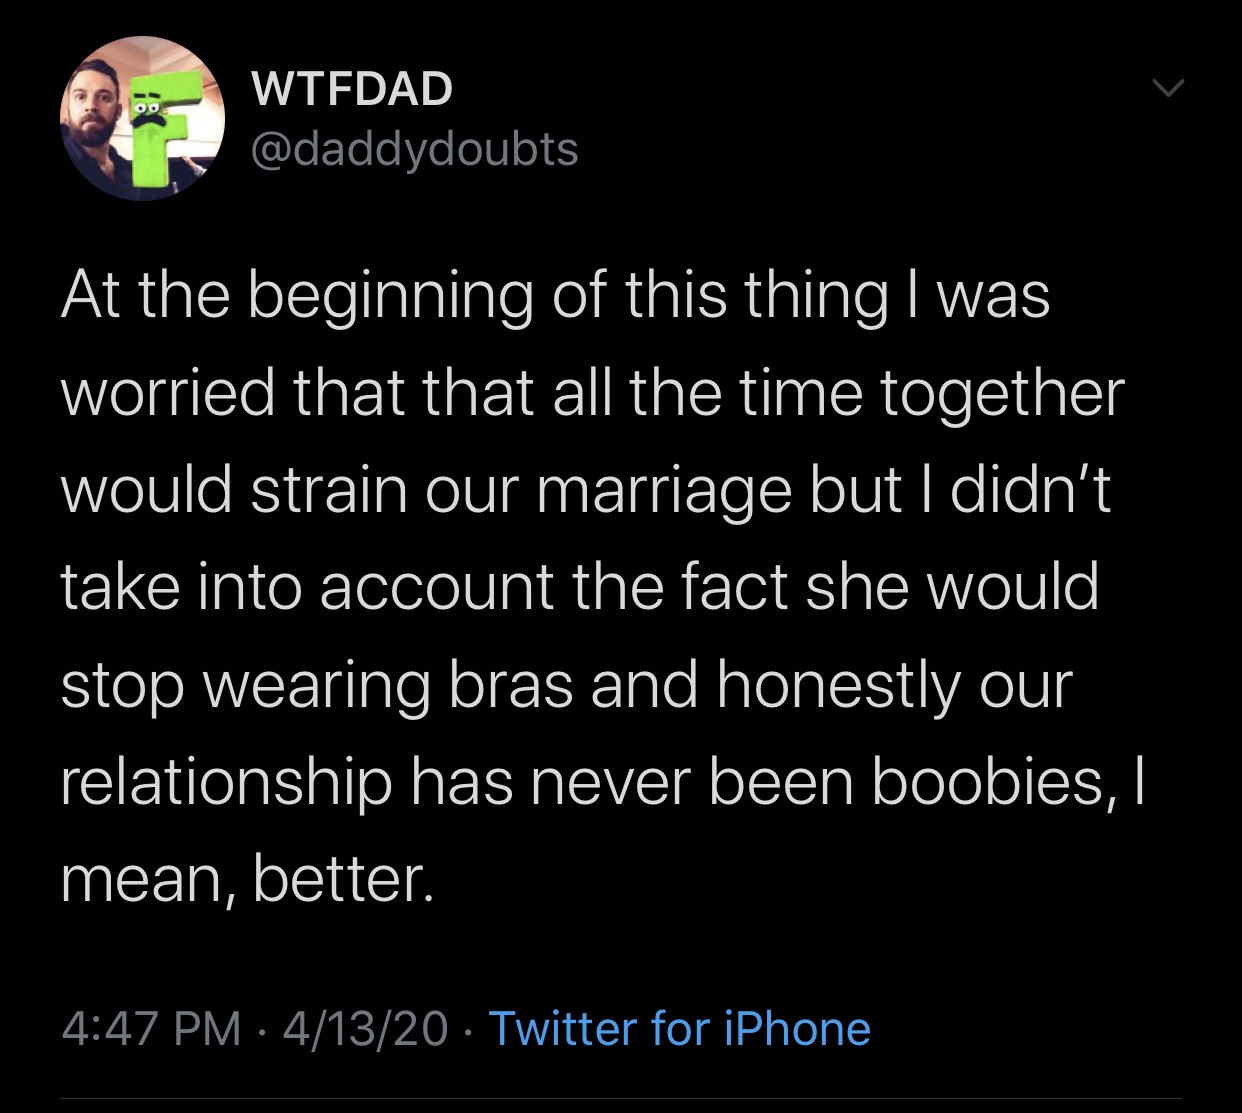 funny memes and tweets - atmosphere - Wtfdad At the beginning of this thing I was worried that that all the time together would strain our marriage but I didn't take into account the fact she would stop wearing bras and honestly our relationship has never